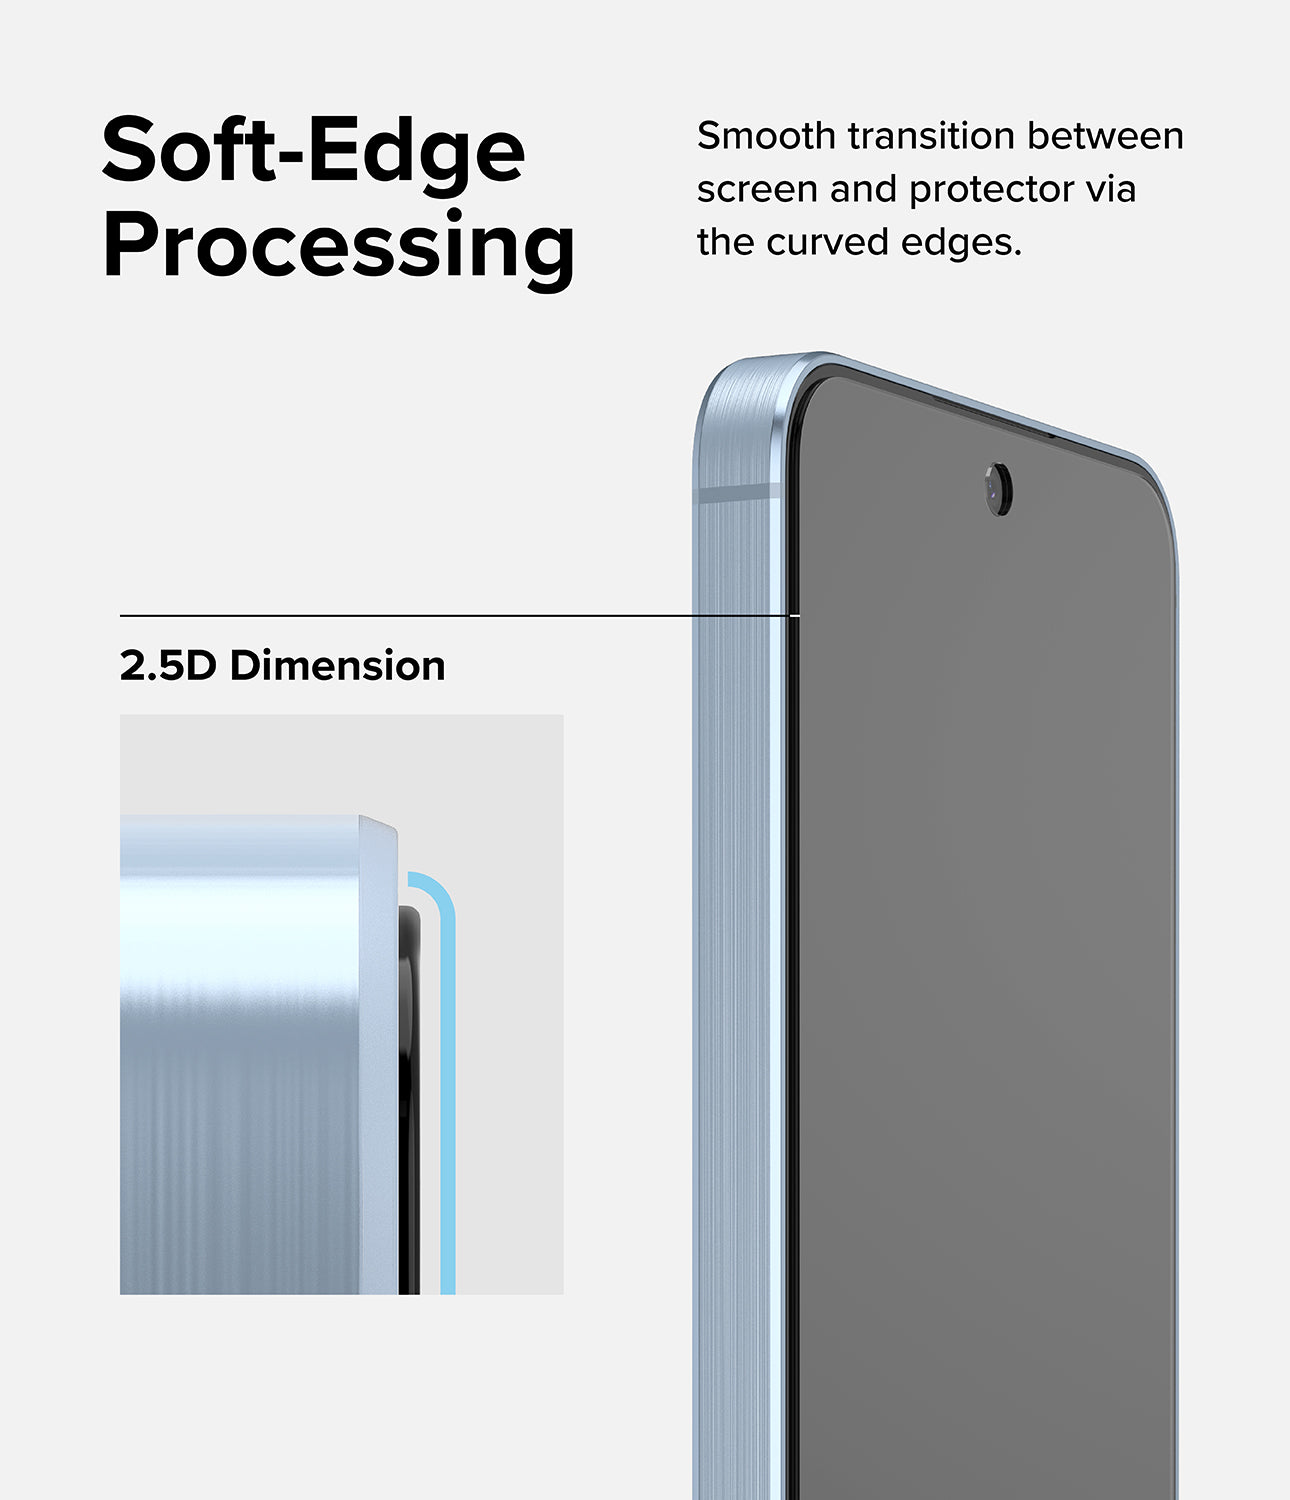 Galaxy A35 Screen Protector | Easy Slide Tempered Glass - Soft-Edge Processing. Smooth transition between screen and protector via the curved edges.